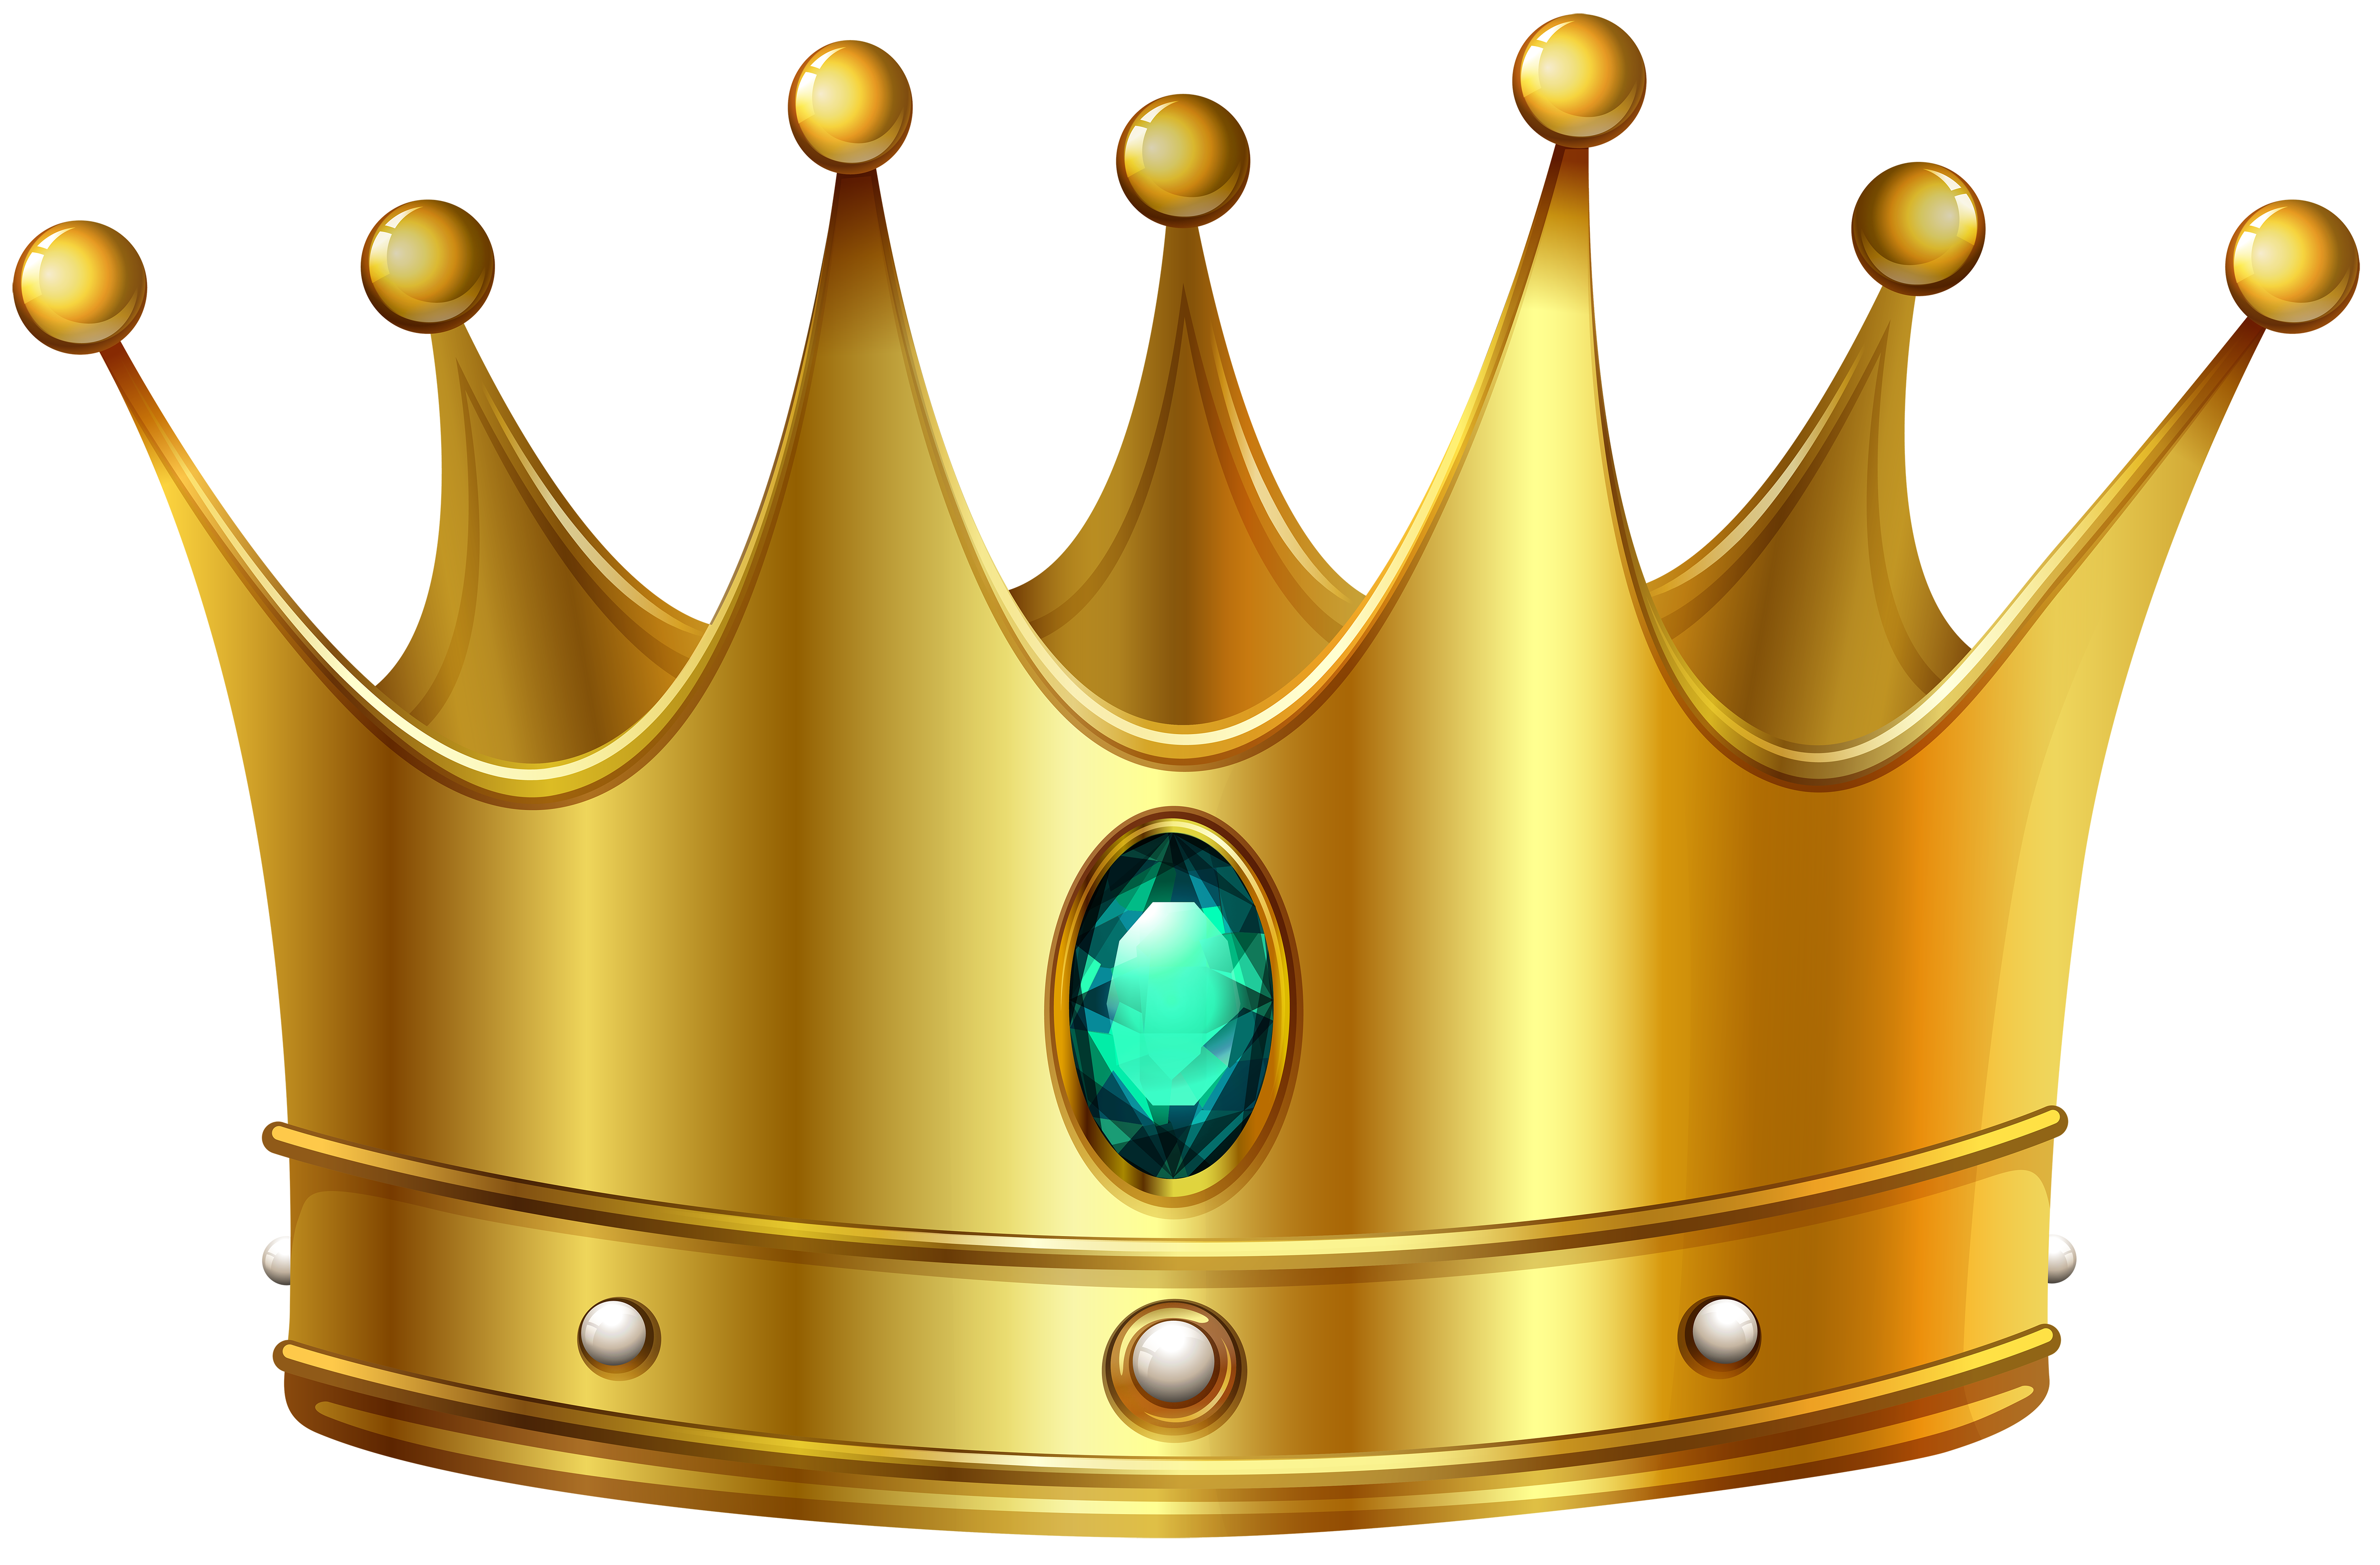 With Diamond Crown Gold Free HQ Image Clipart